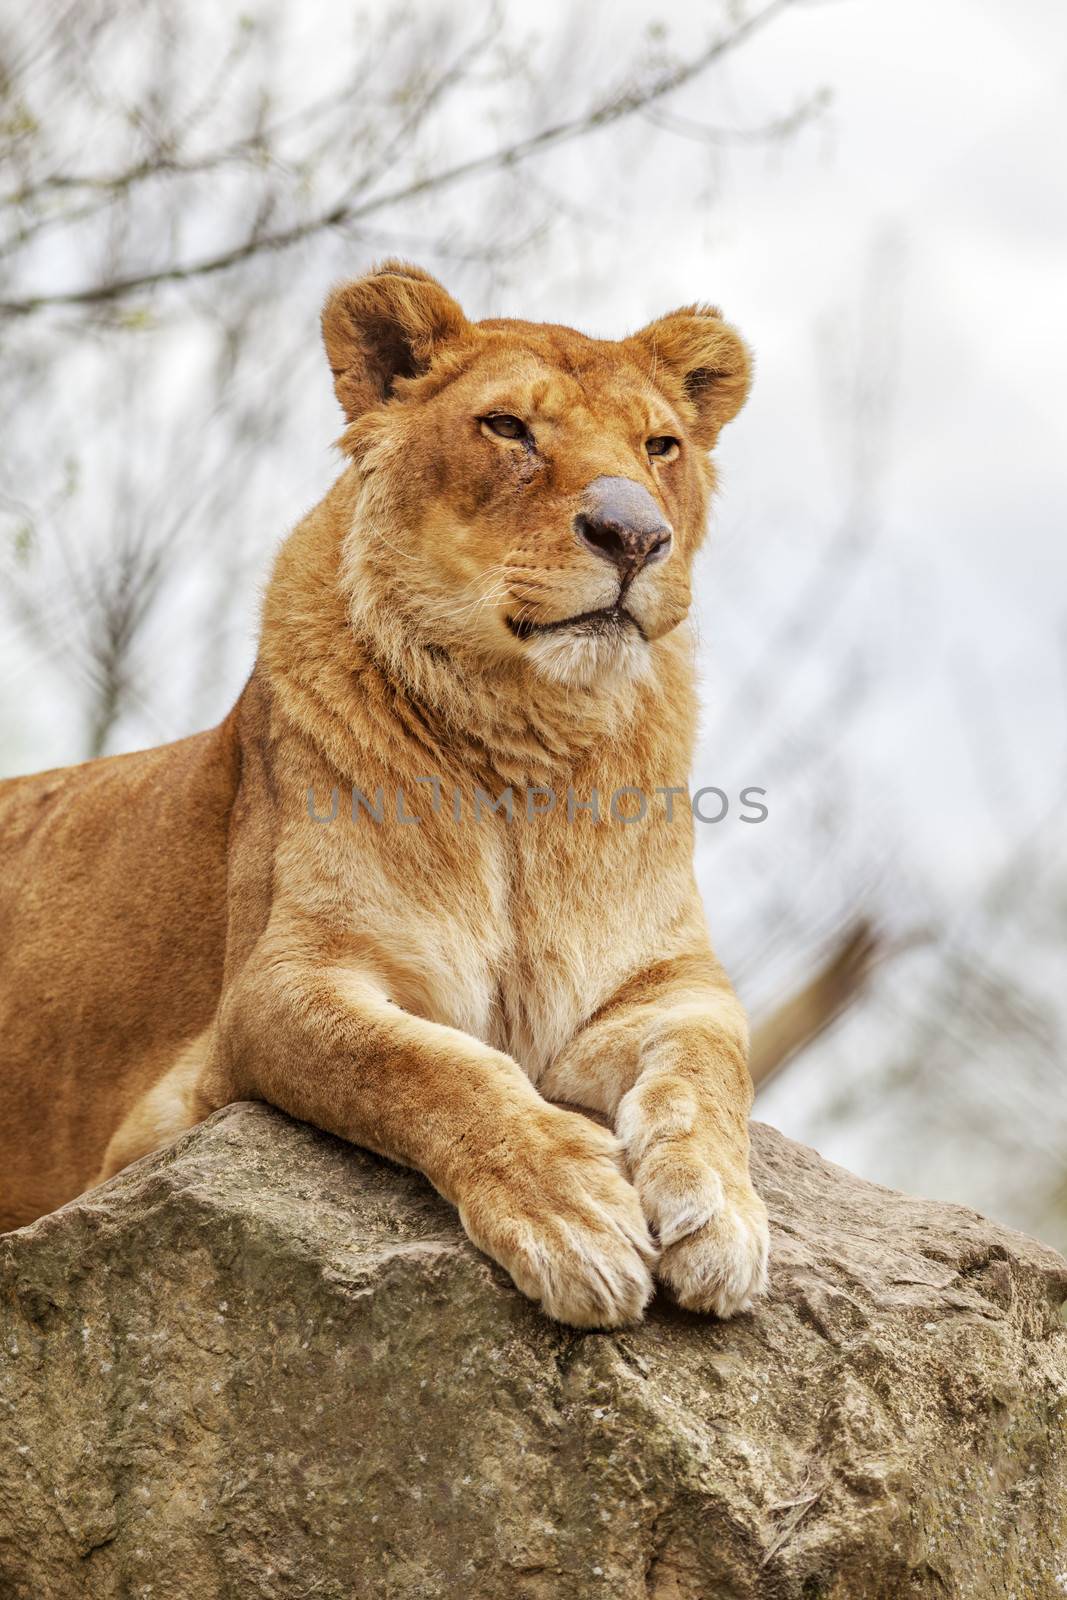 Lioness by vwalakte